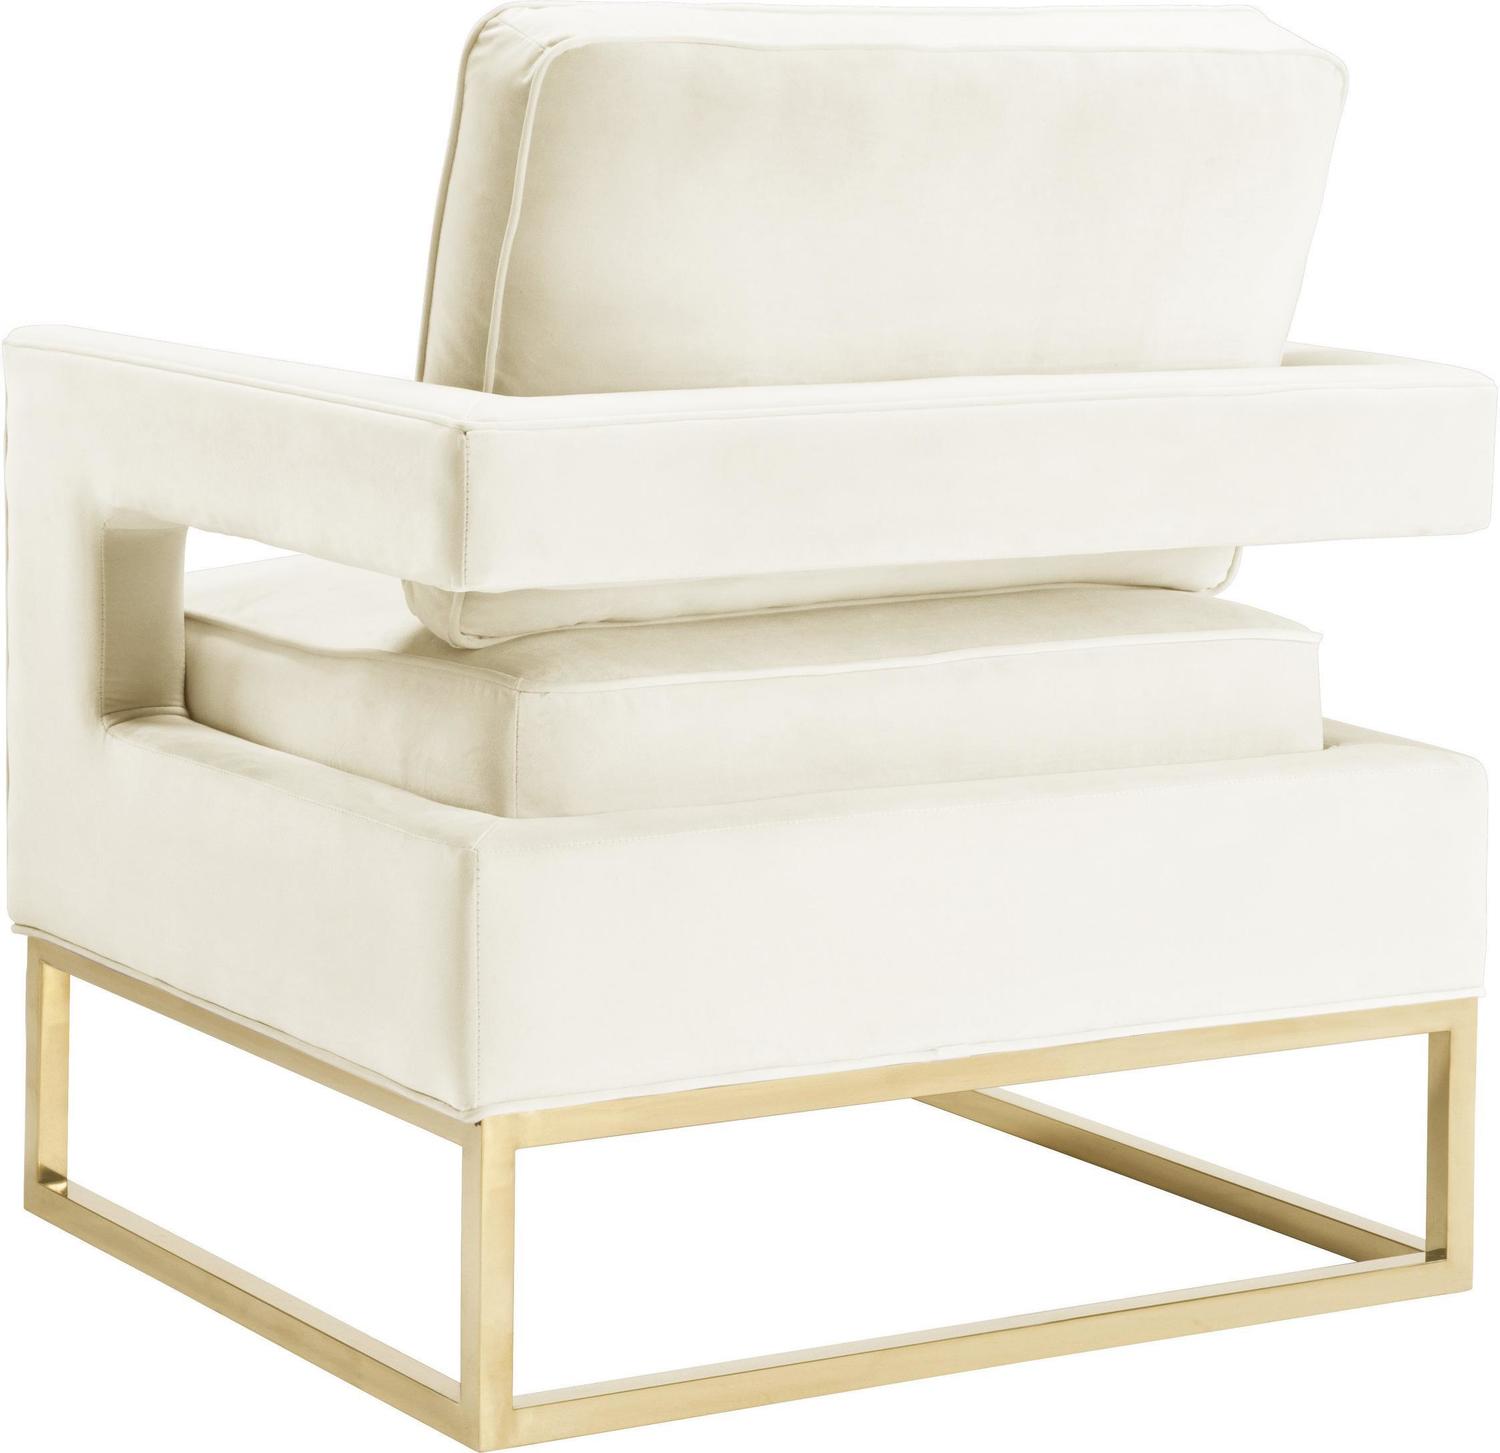 best comfortable chairs for living room Contemporary Design Furniture Accent Chairs Cream